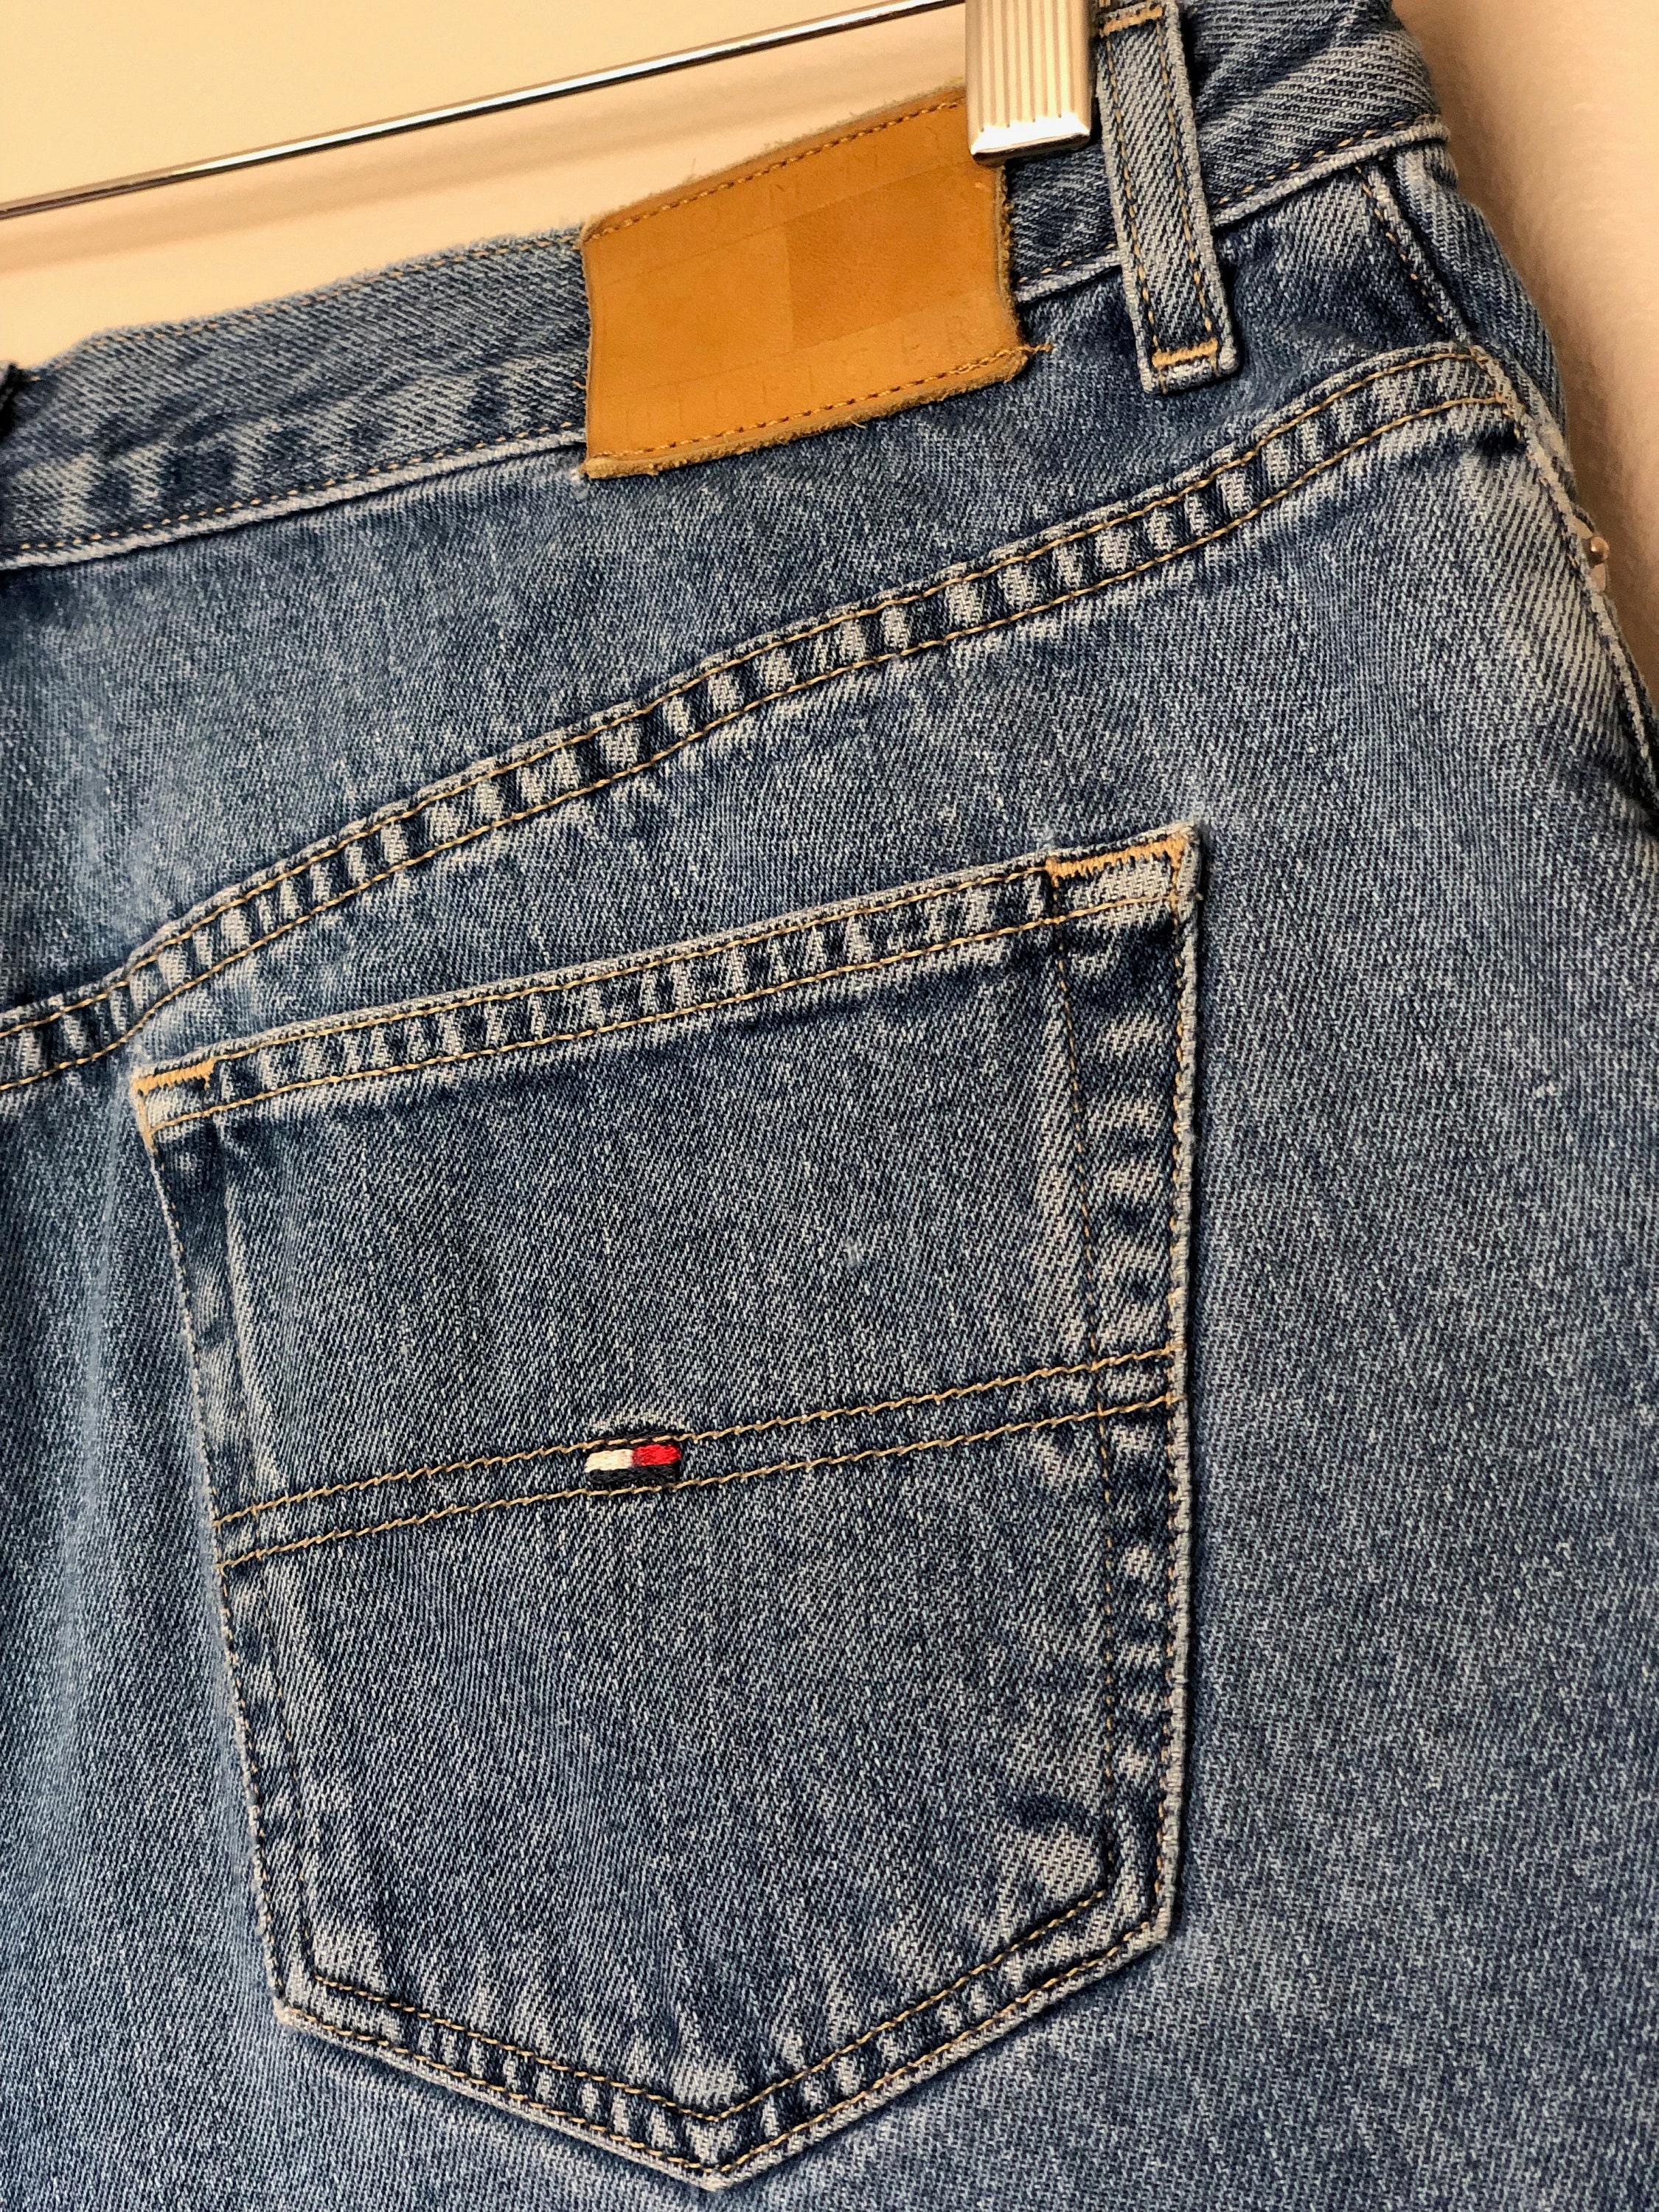 Vintage Authentic Tommy Hilfiger Jean Shorts Tommy Jean | Etsy